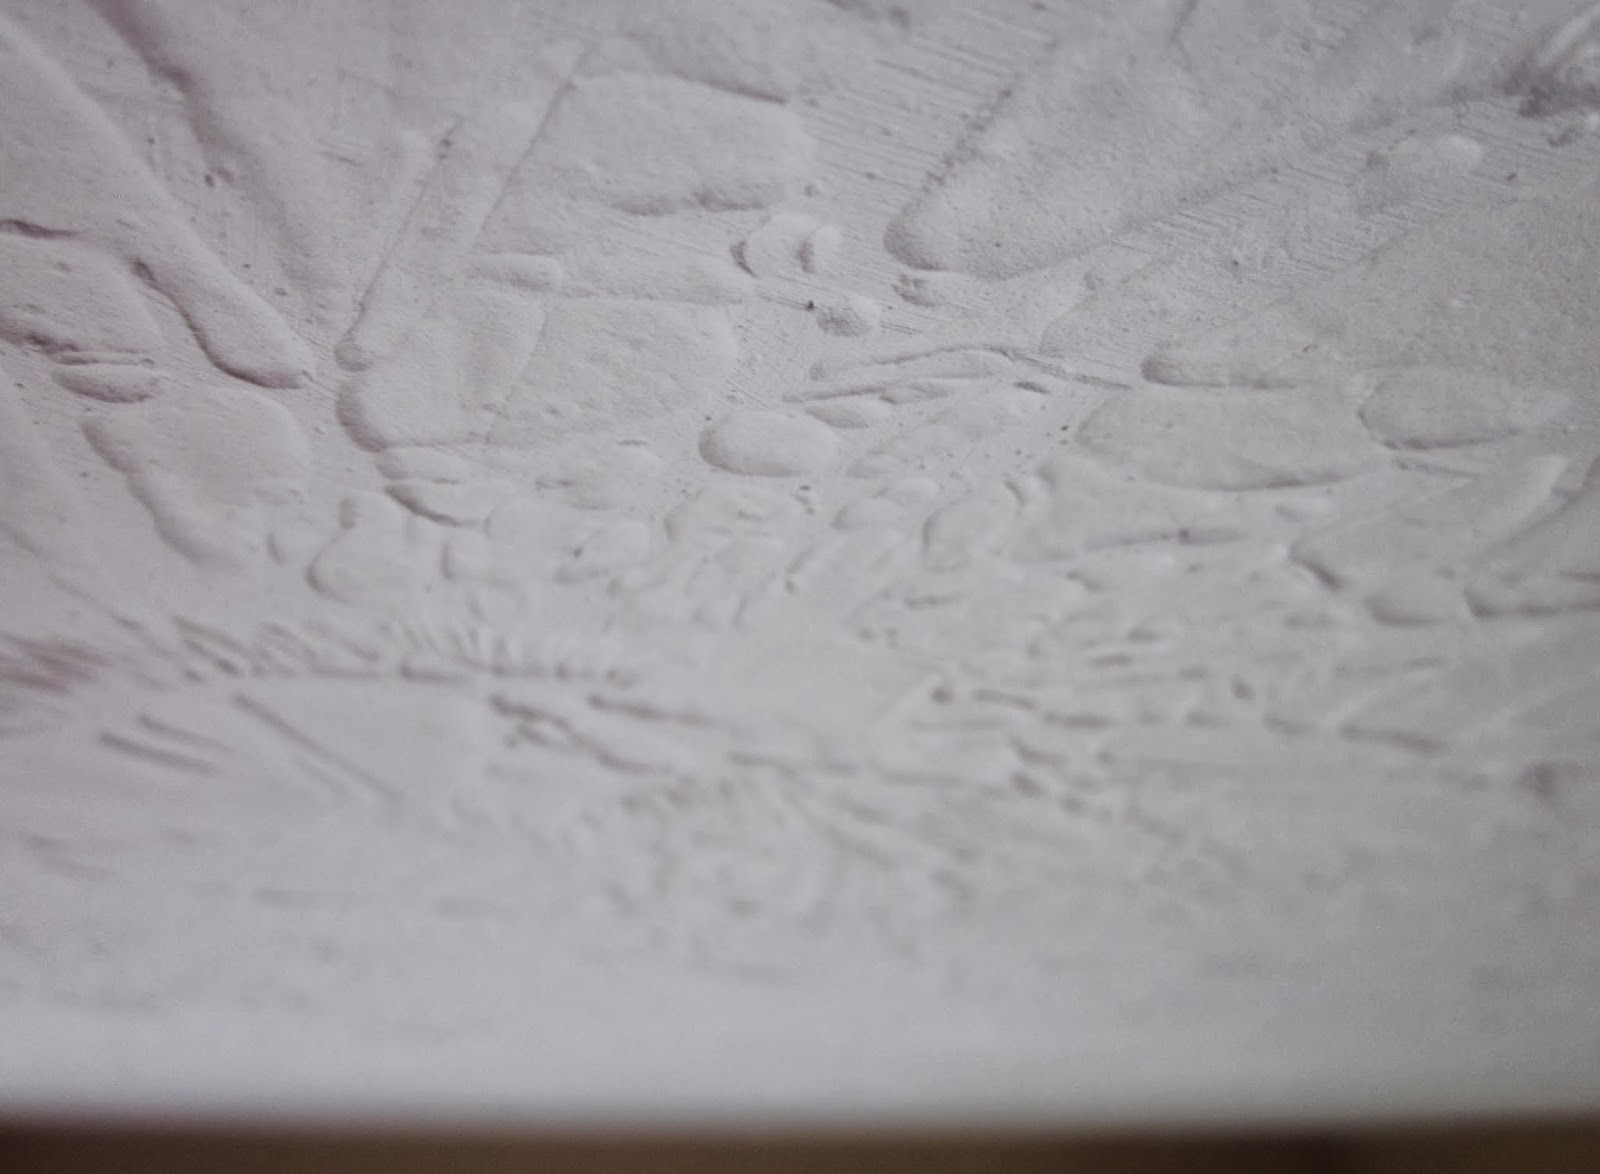 BonnieProjects: Removing textured ceilings